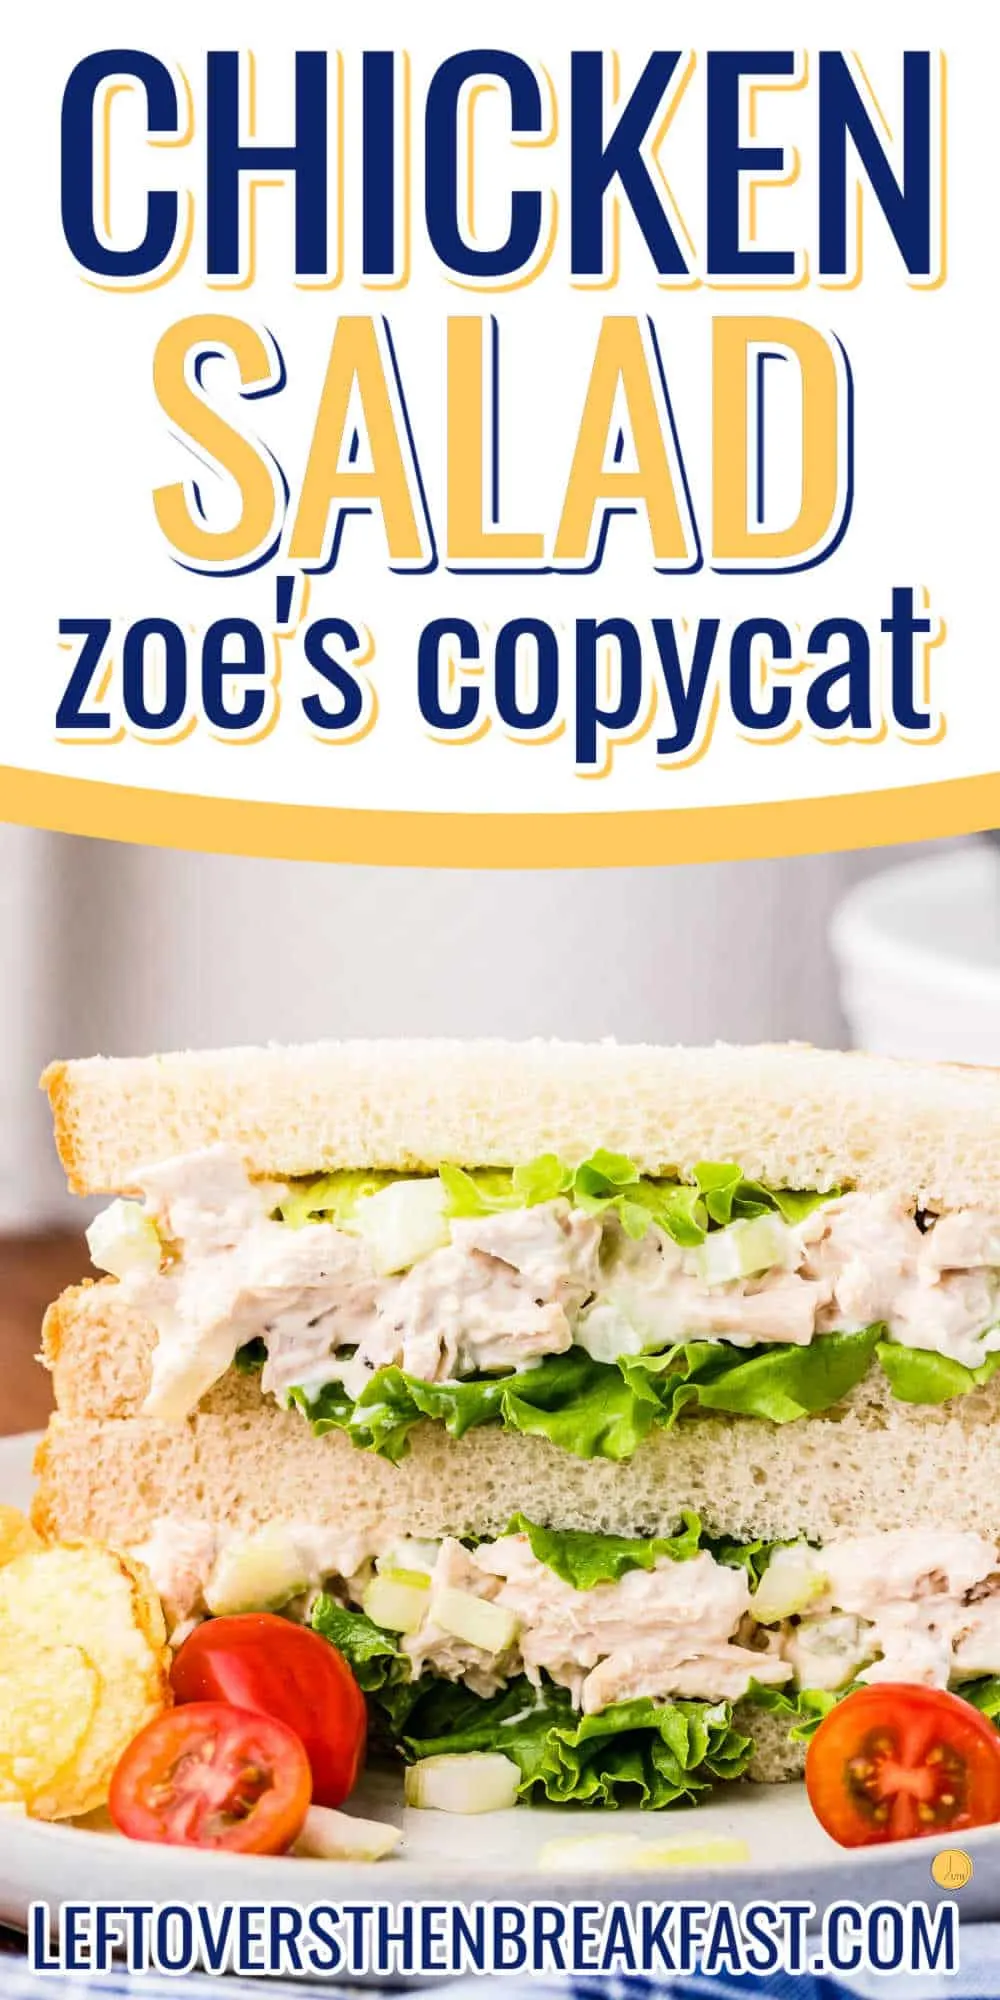 stack of sandwiches on a plate with text "chicken salad Zoe's copycat"